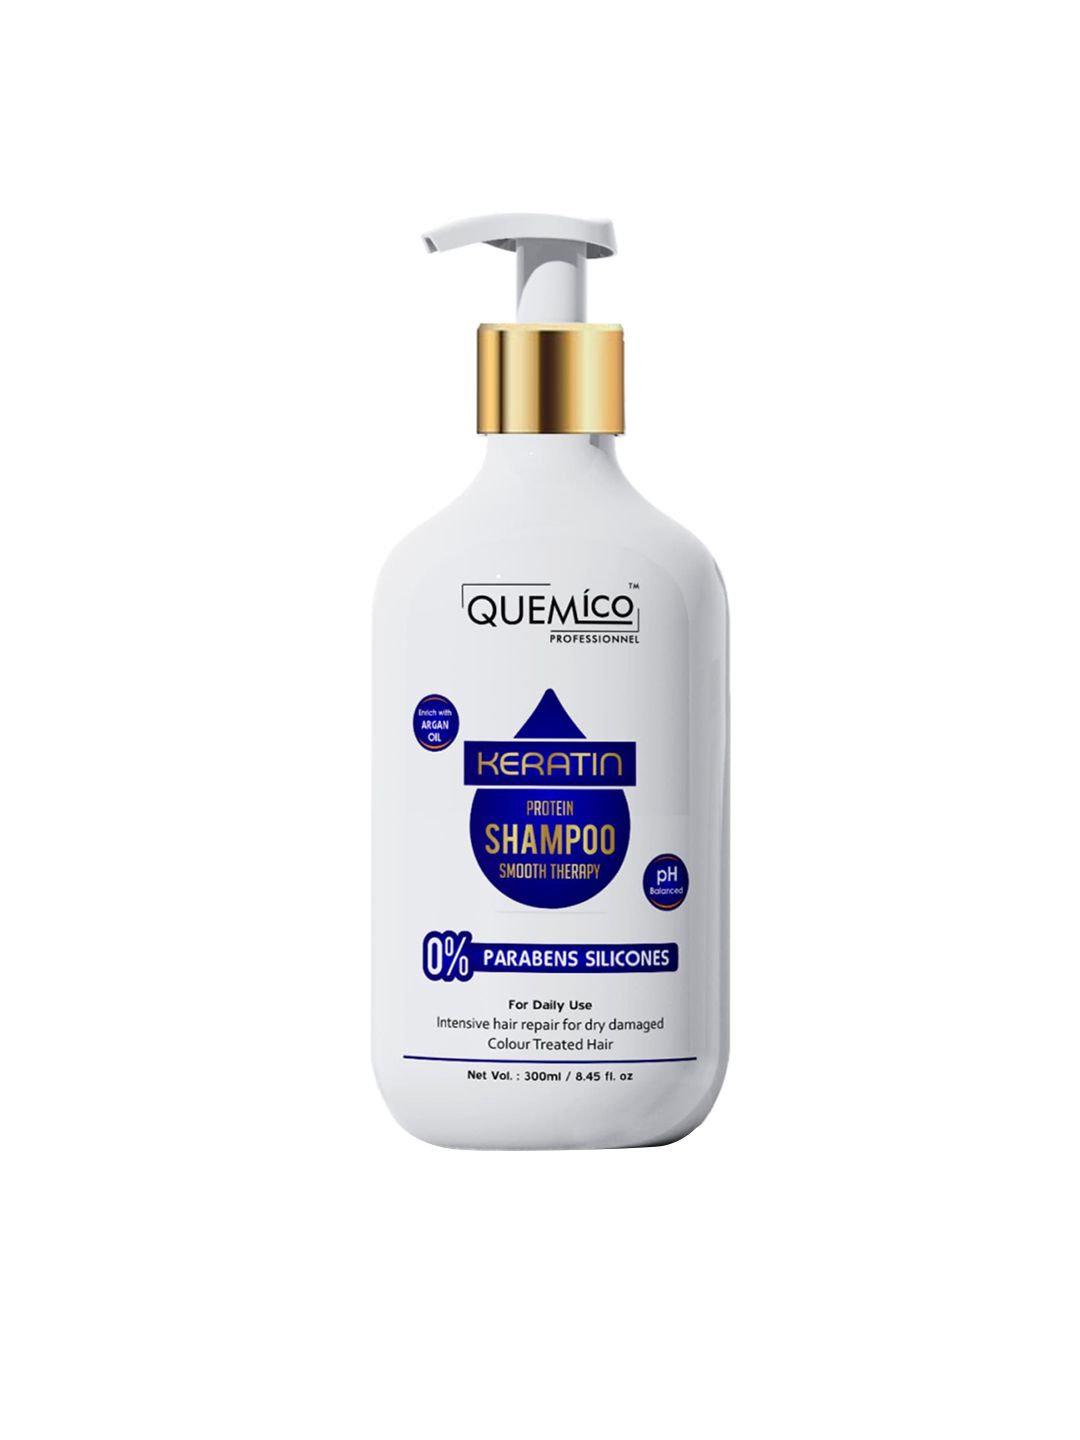 Quemico Professionnel Keratin Protein Smooth Shampoo 300ml Price in India